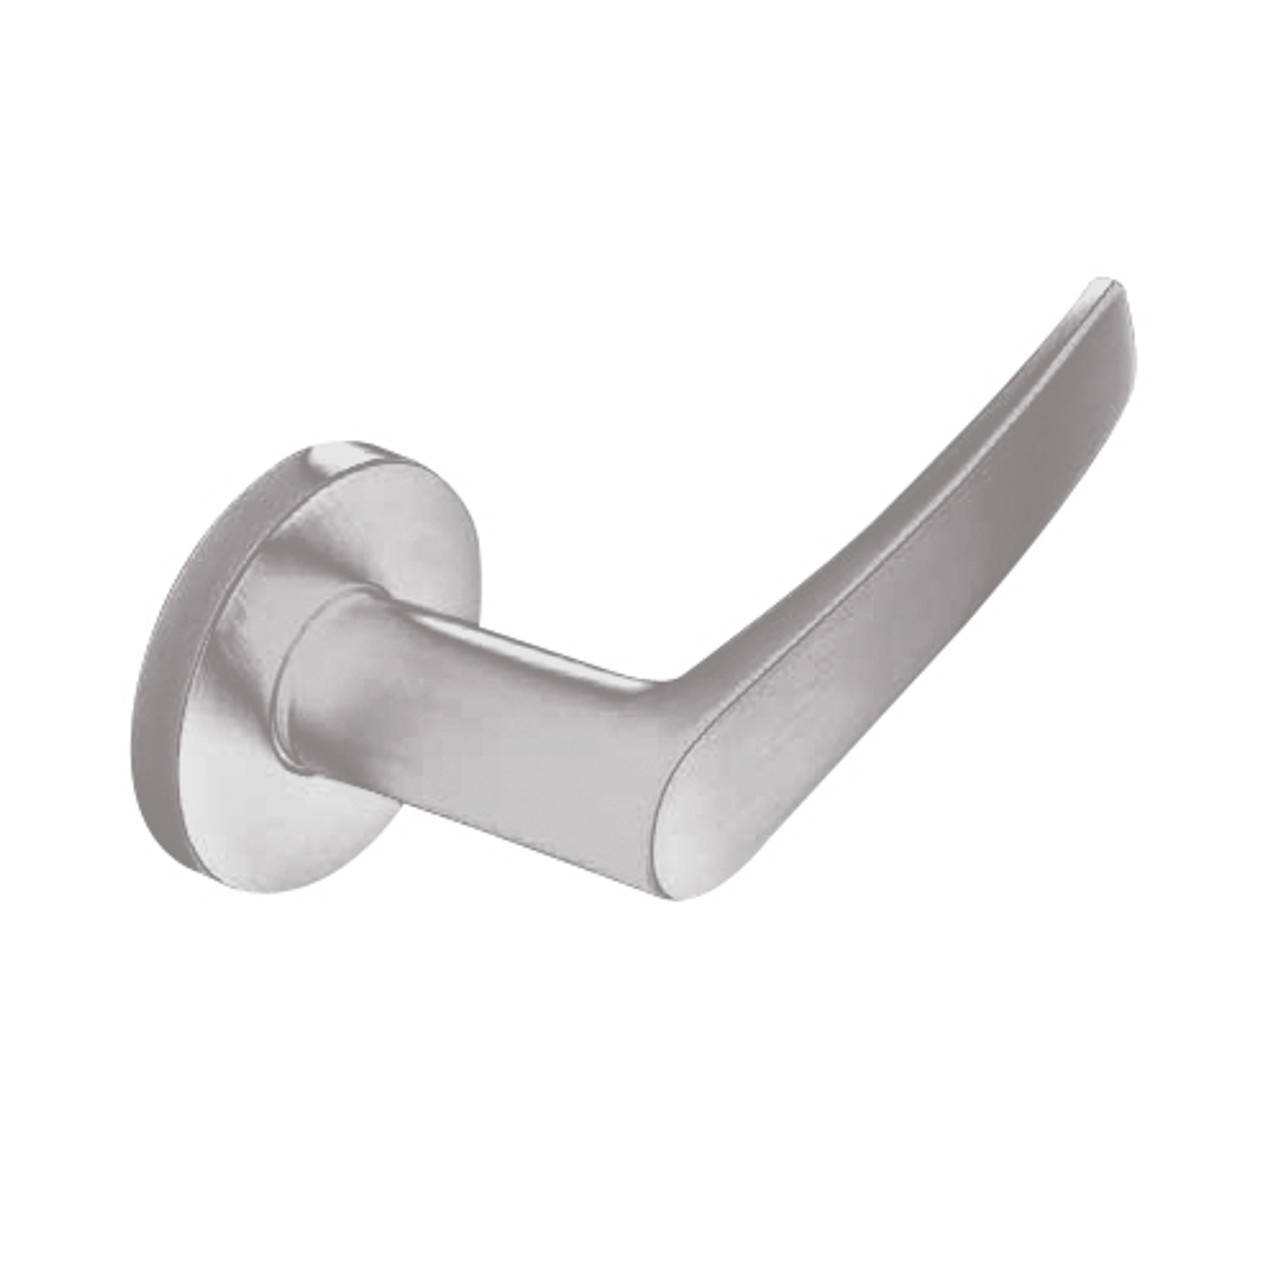 ML2055-ASA-630 Corbin Russwin ML2000 Series Mortise Classroom Locksets with Armstrong Lever in Satin Stainless